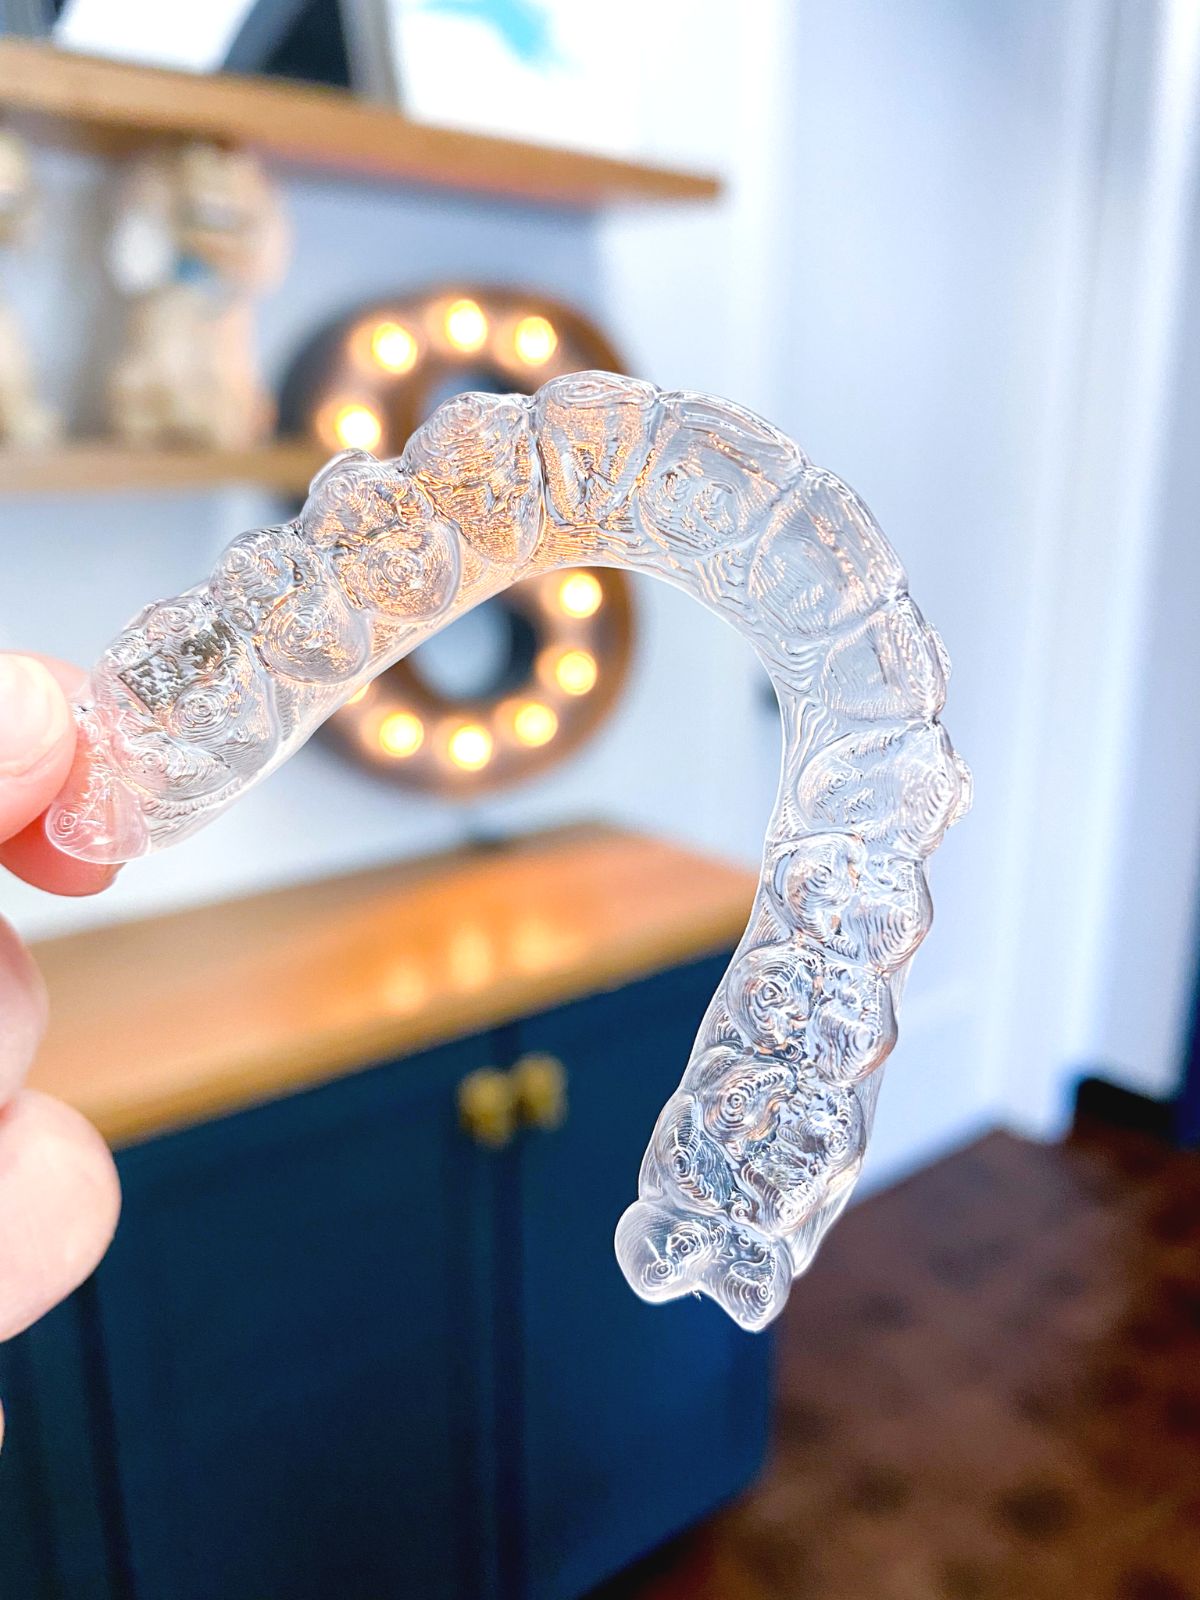 5 Things You Won't Get with Mail-Order Orthodontics